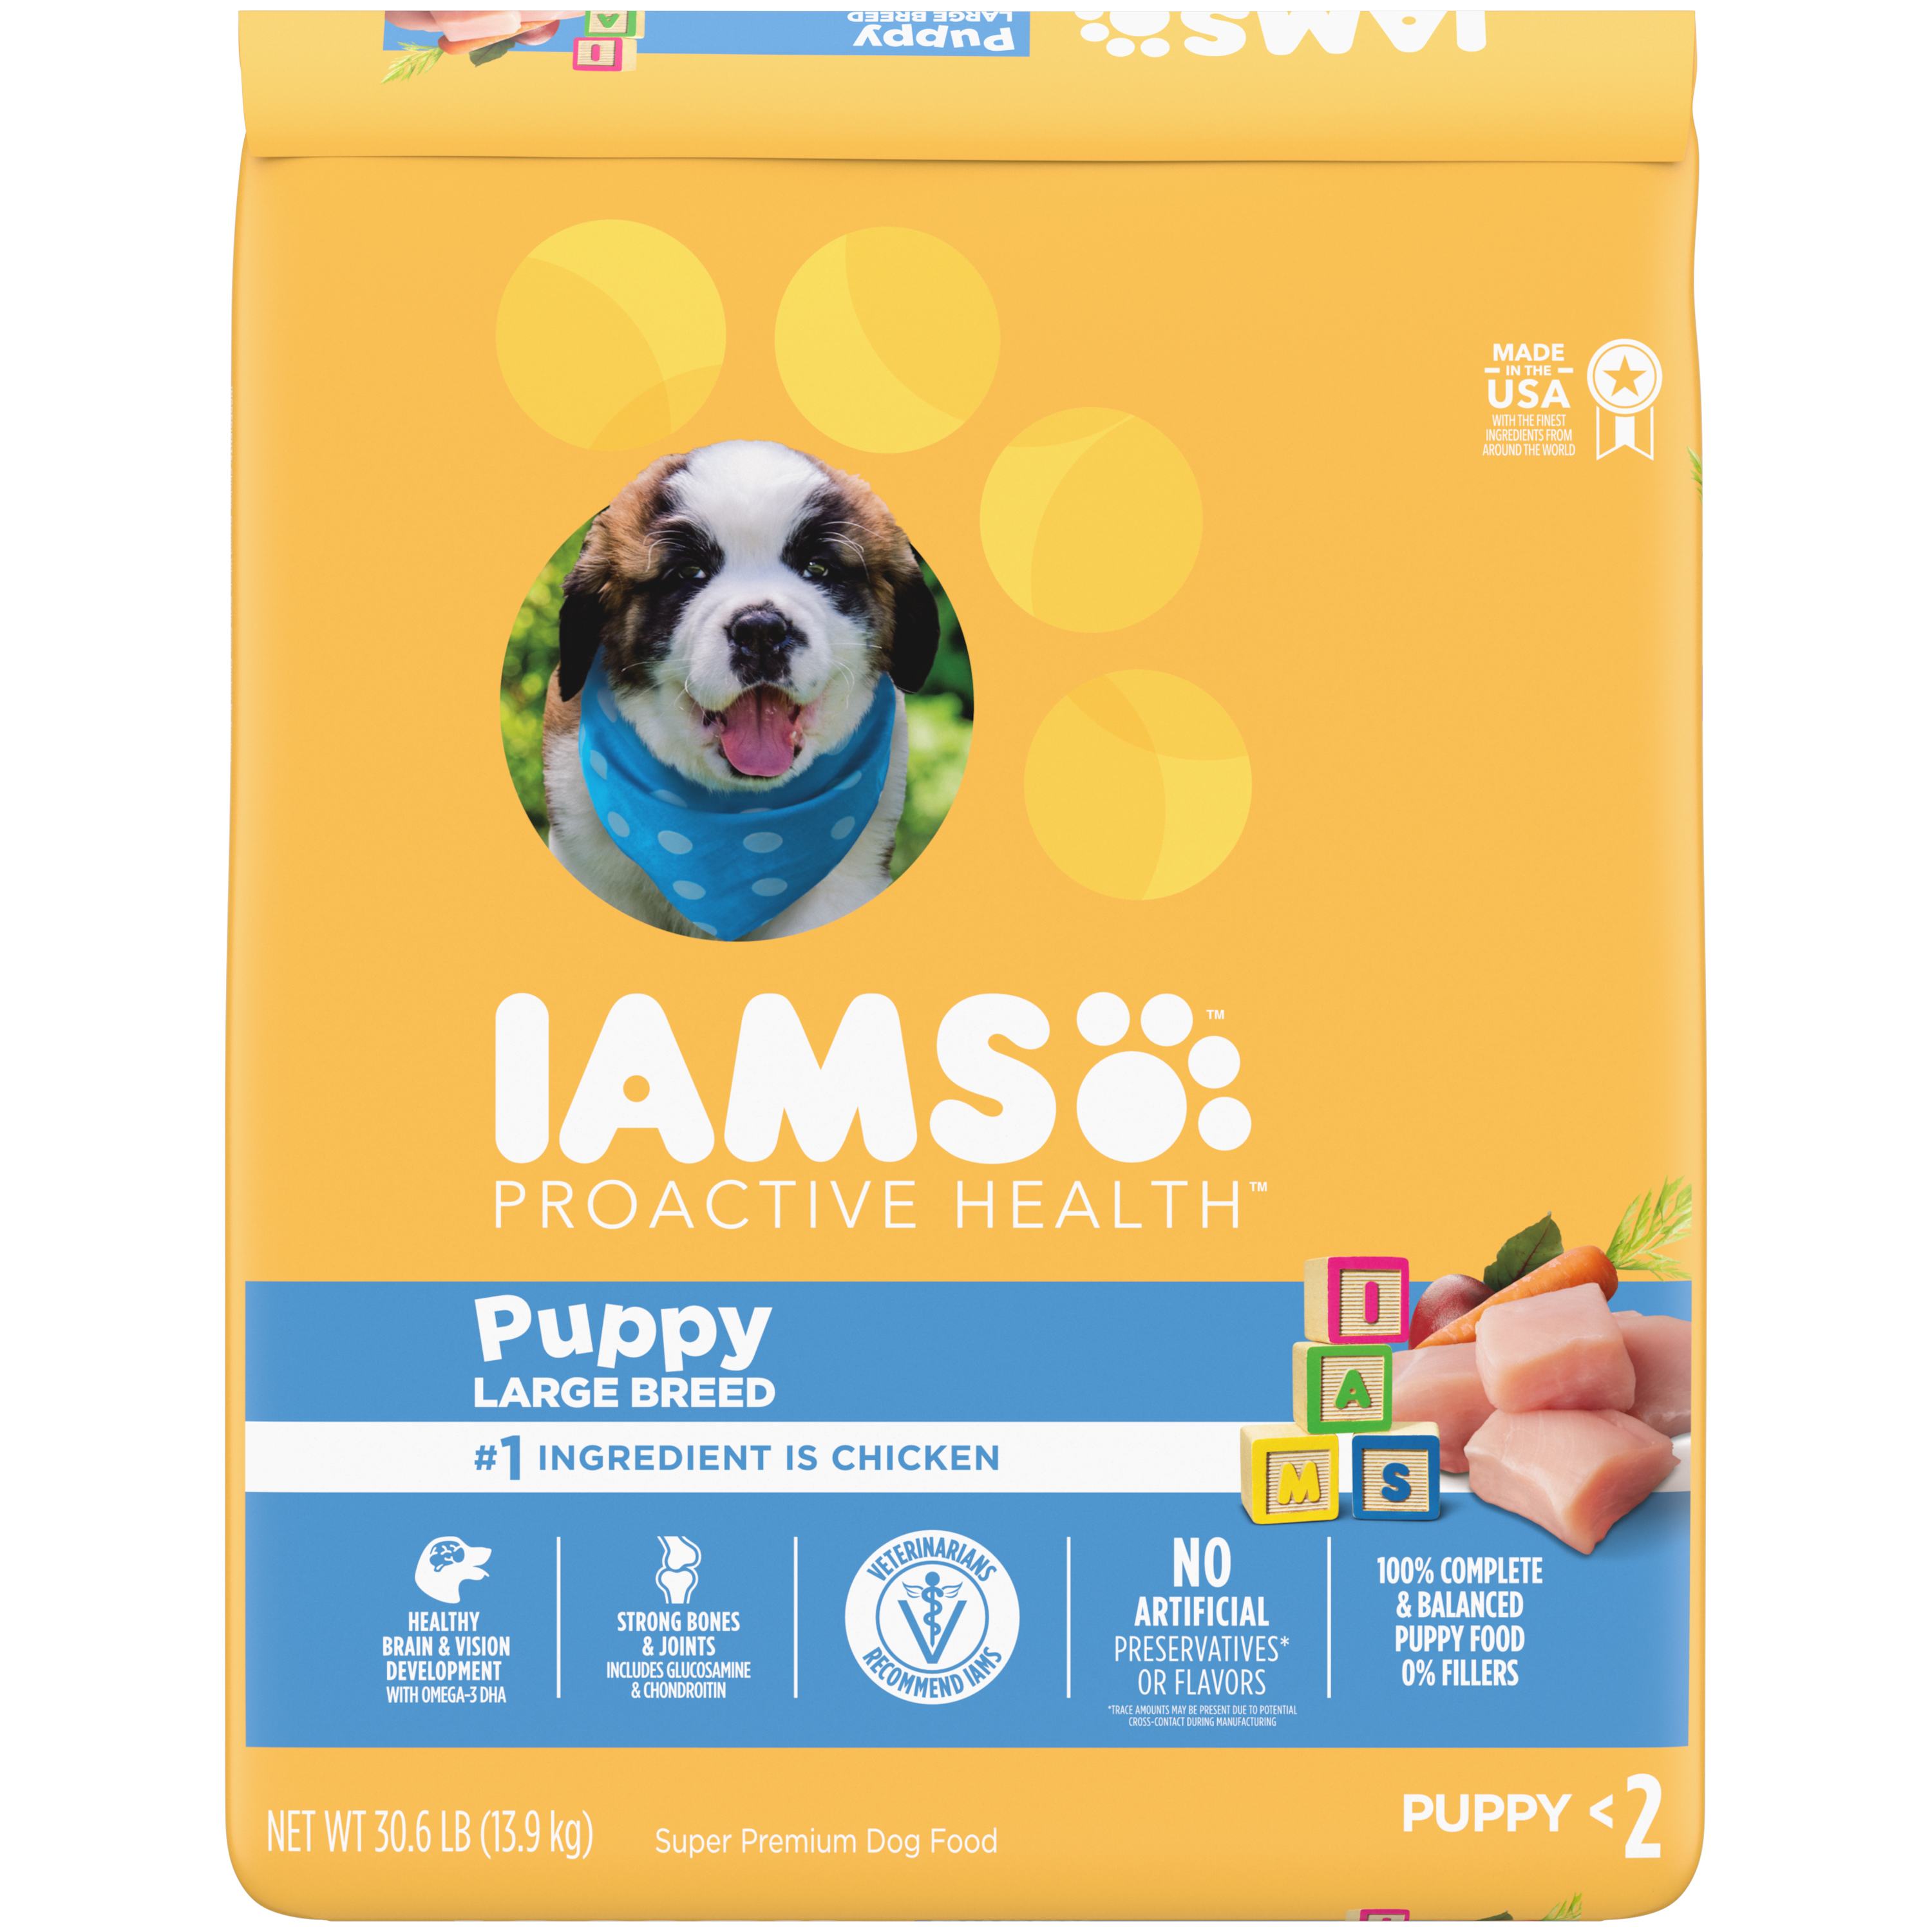 30.6 Lb Iams Large Breed Puppy - Healing/First Aid